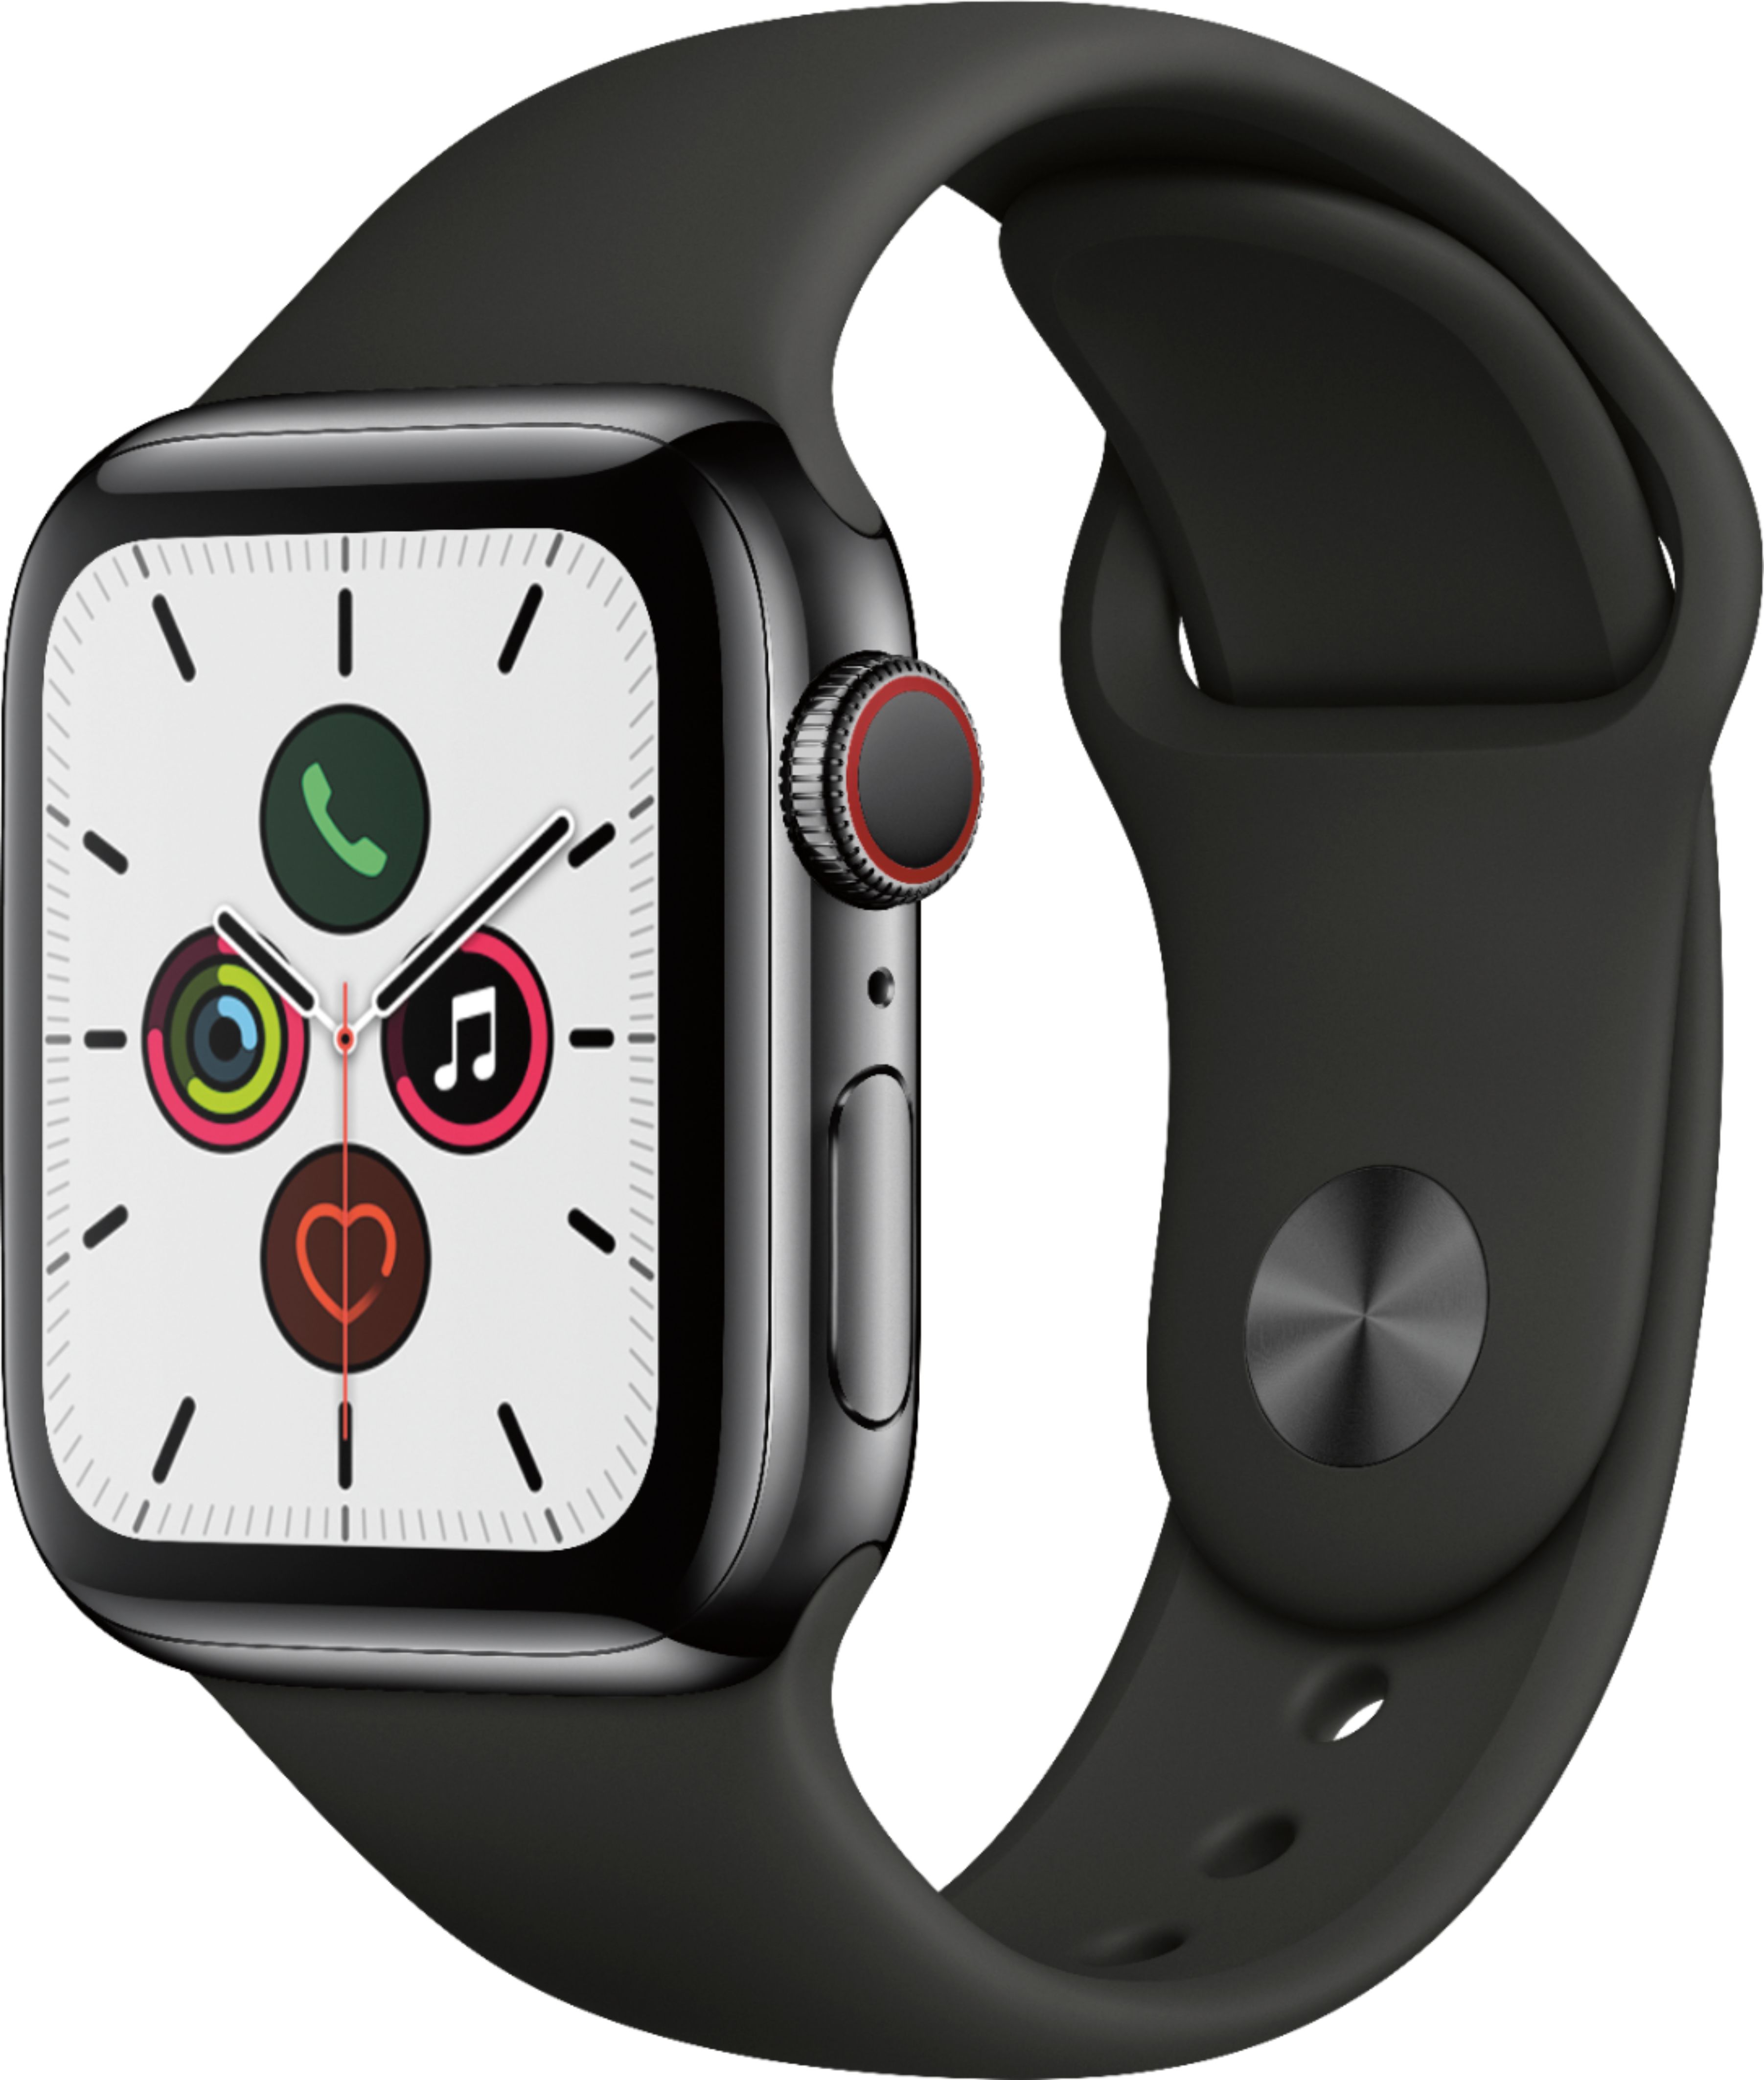 Apple Apple Watch Series 5 (GPS + Cellular) 40mm Space Black Stainless Steel Case with Black 